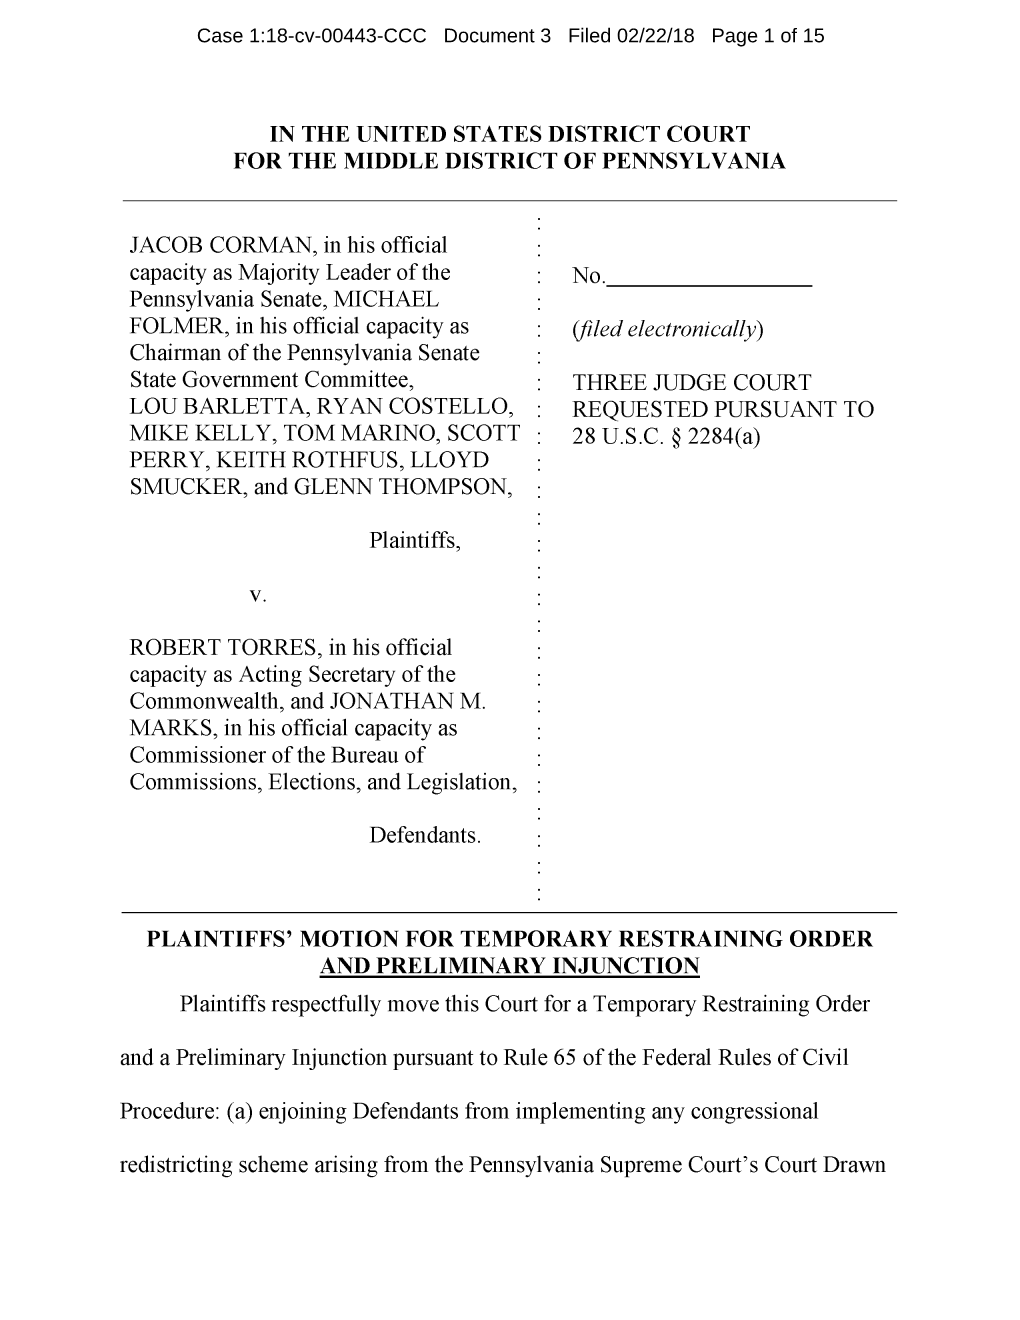 Plaintiffs Motion for Temporary Restraining Order and Preliminary